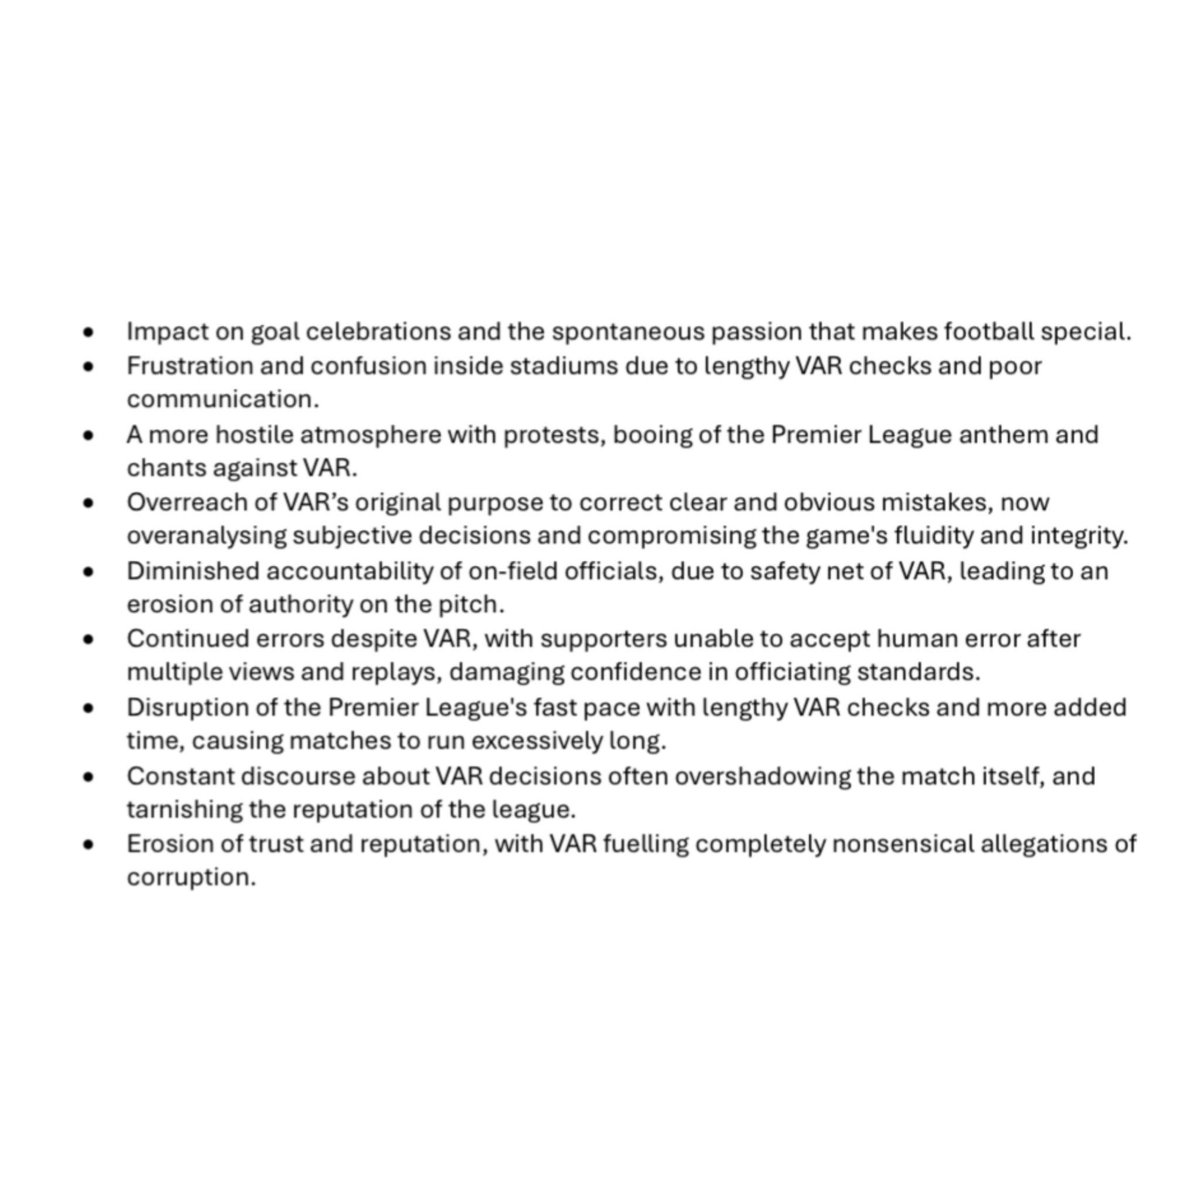 The reasons included in Wolves’ official statement highlighting why they’re requesting a vote on the removal of VAR in the Premier League.